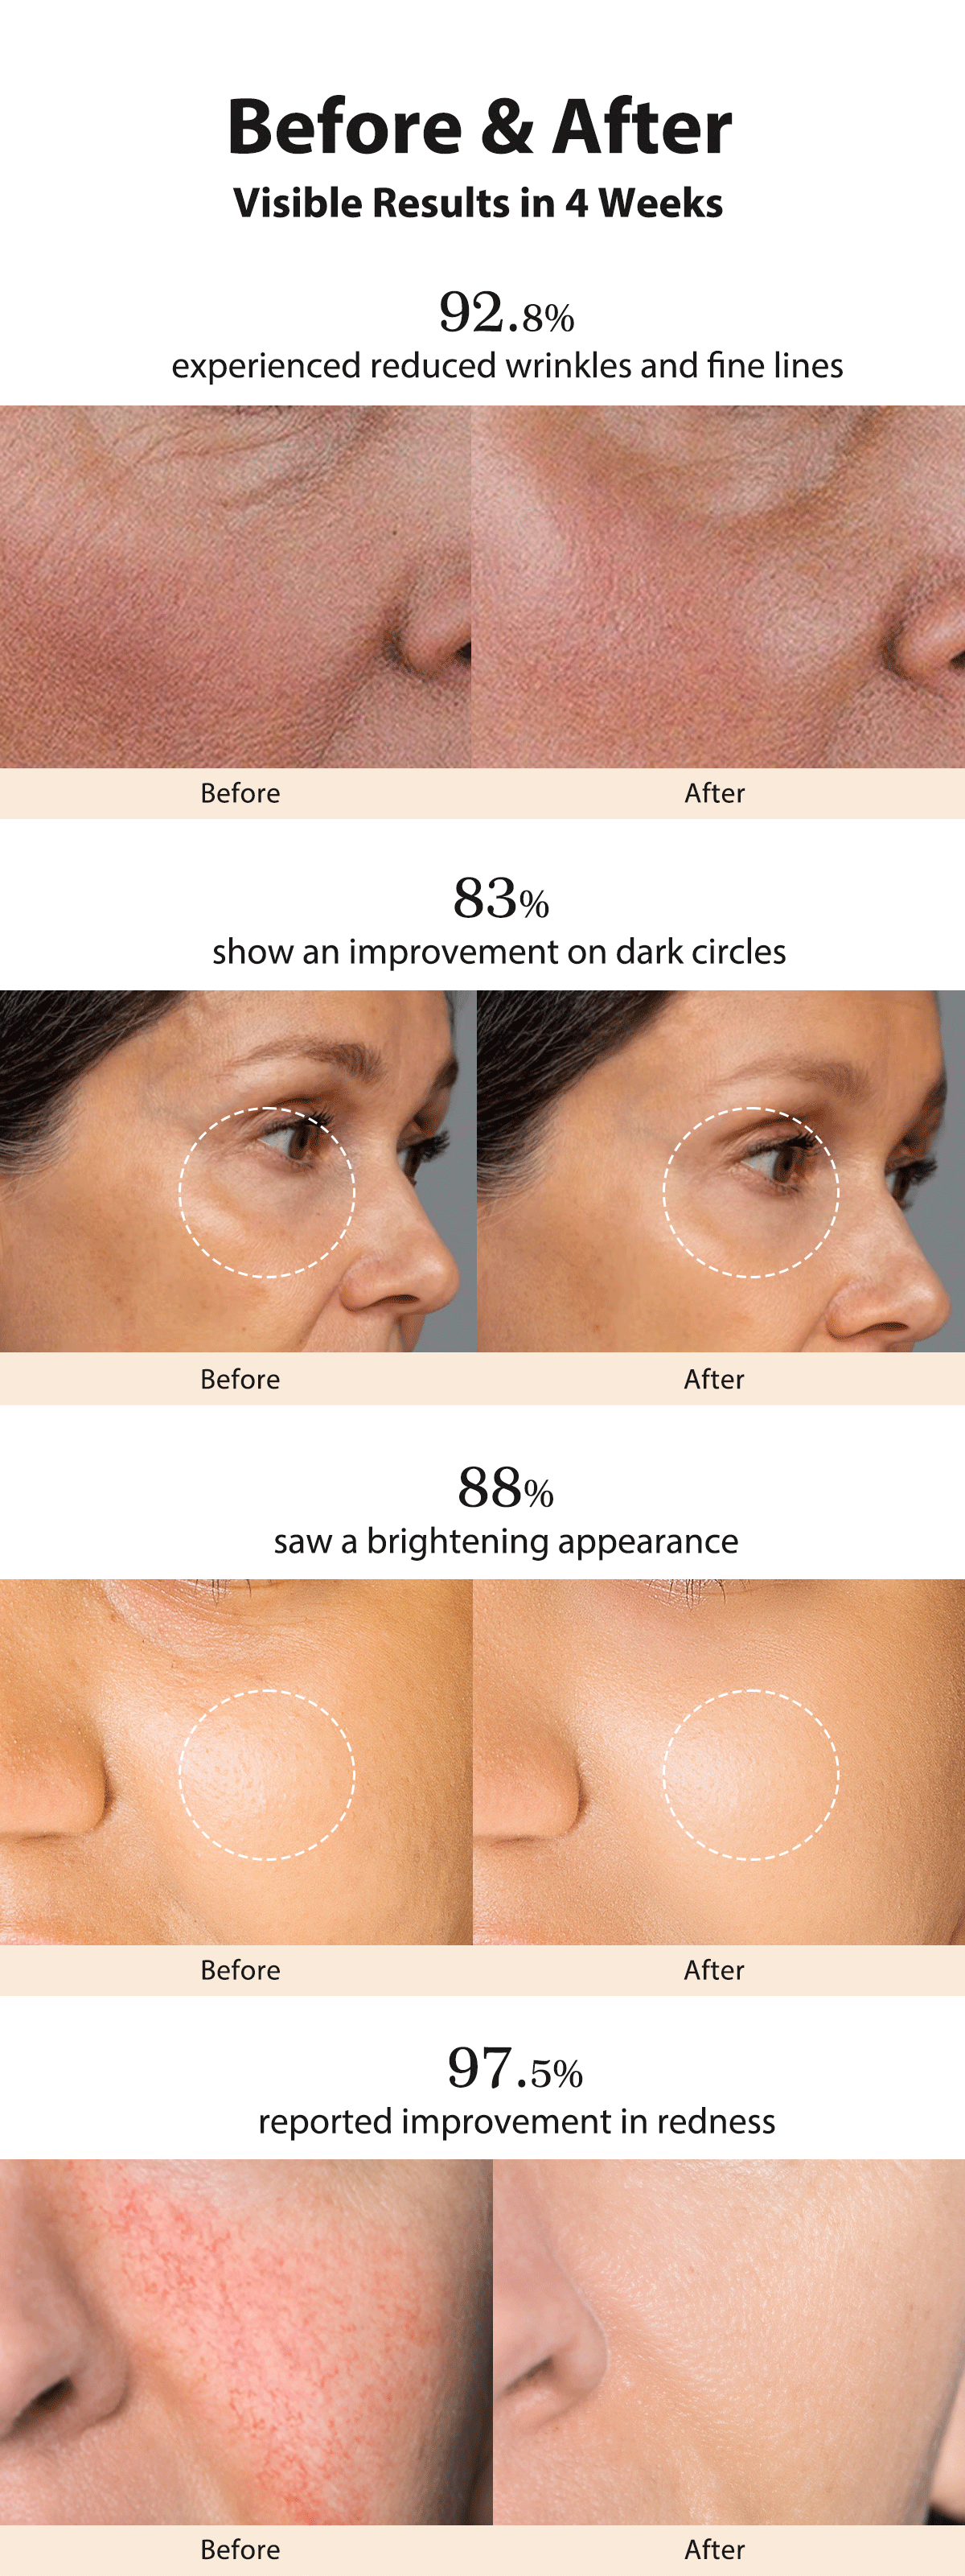 Before and after skincare transformation showing 92.8% reduced wrinkles, 83% improvement in dark circles, 88% skin brightening, and 97.5% reduction in redness.